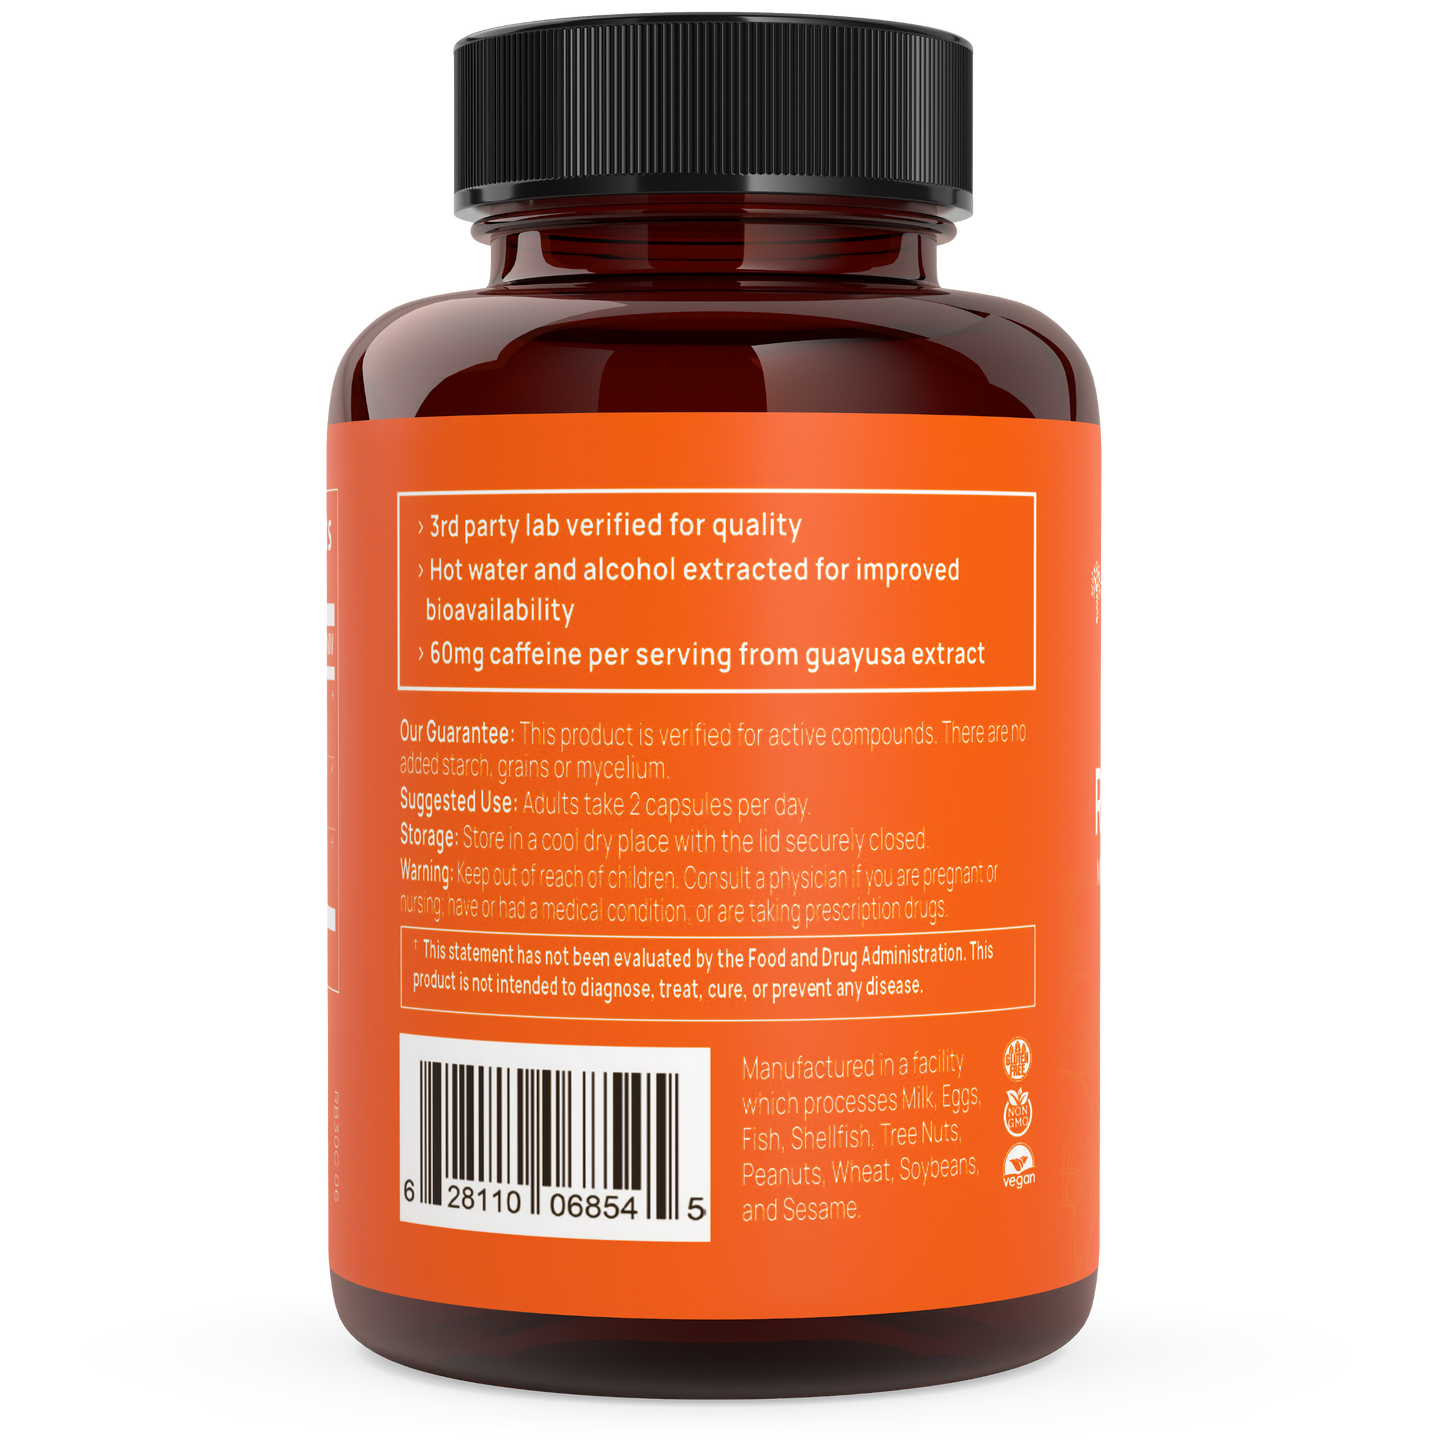 The back of a bottle of RealBoost - Cordyceps, Guayusa and Ginseng by Real Mushrooms.